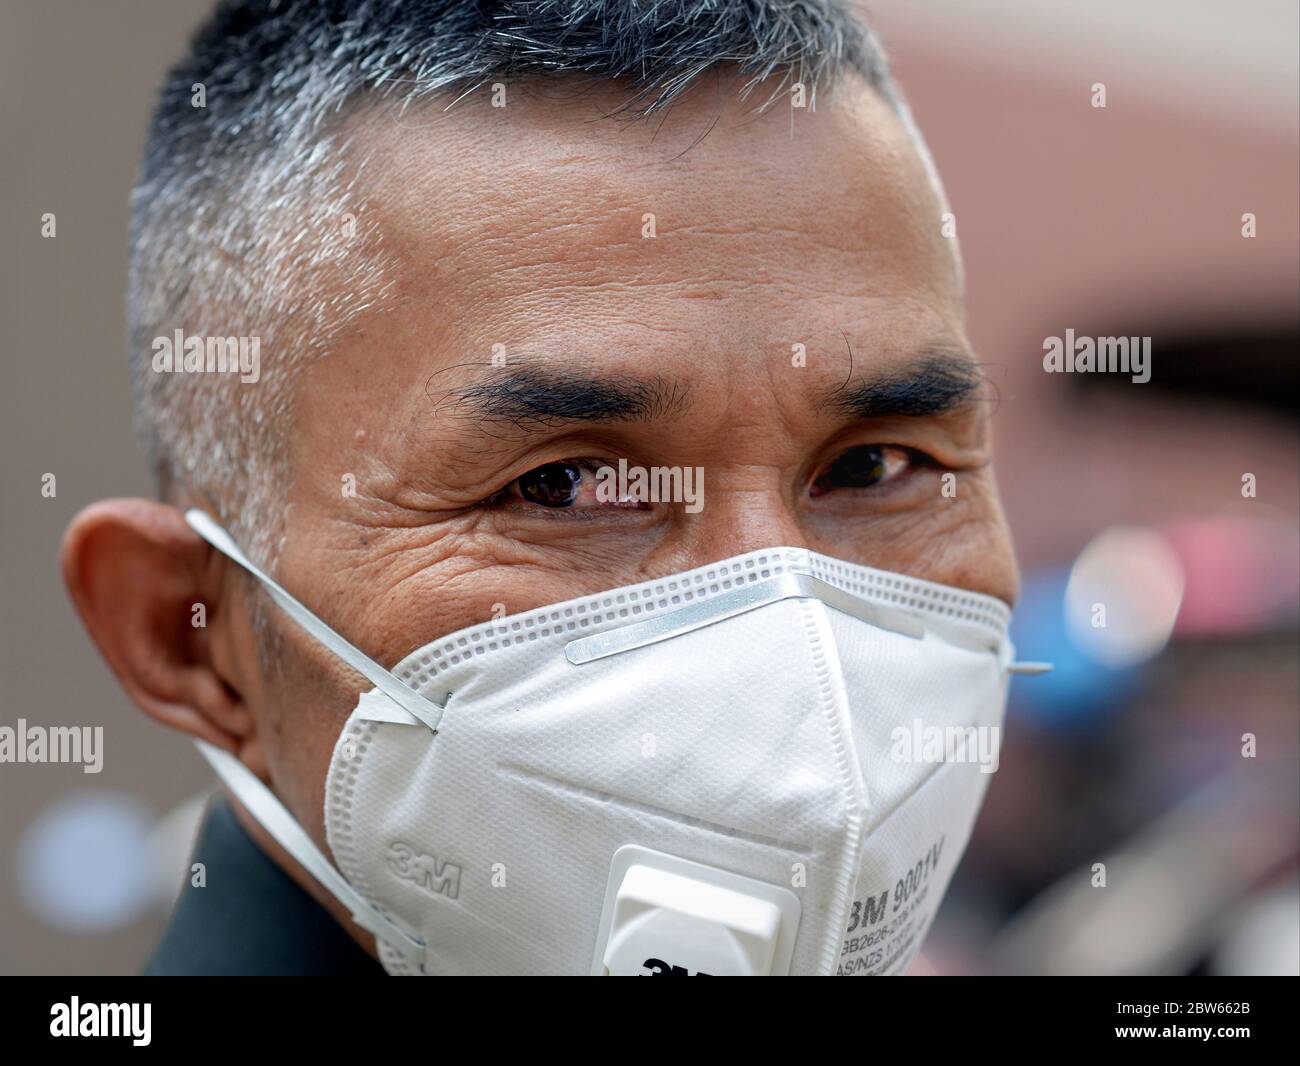 Royal Thai police officer wears a protective face mask with breathing valve. Stock Photo